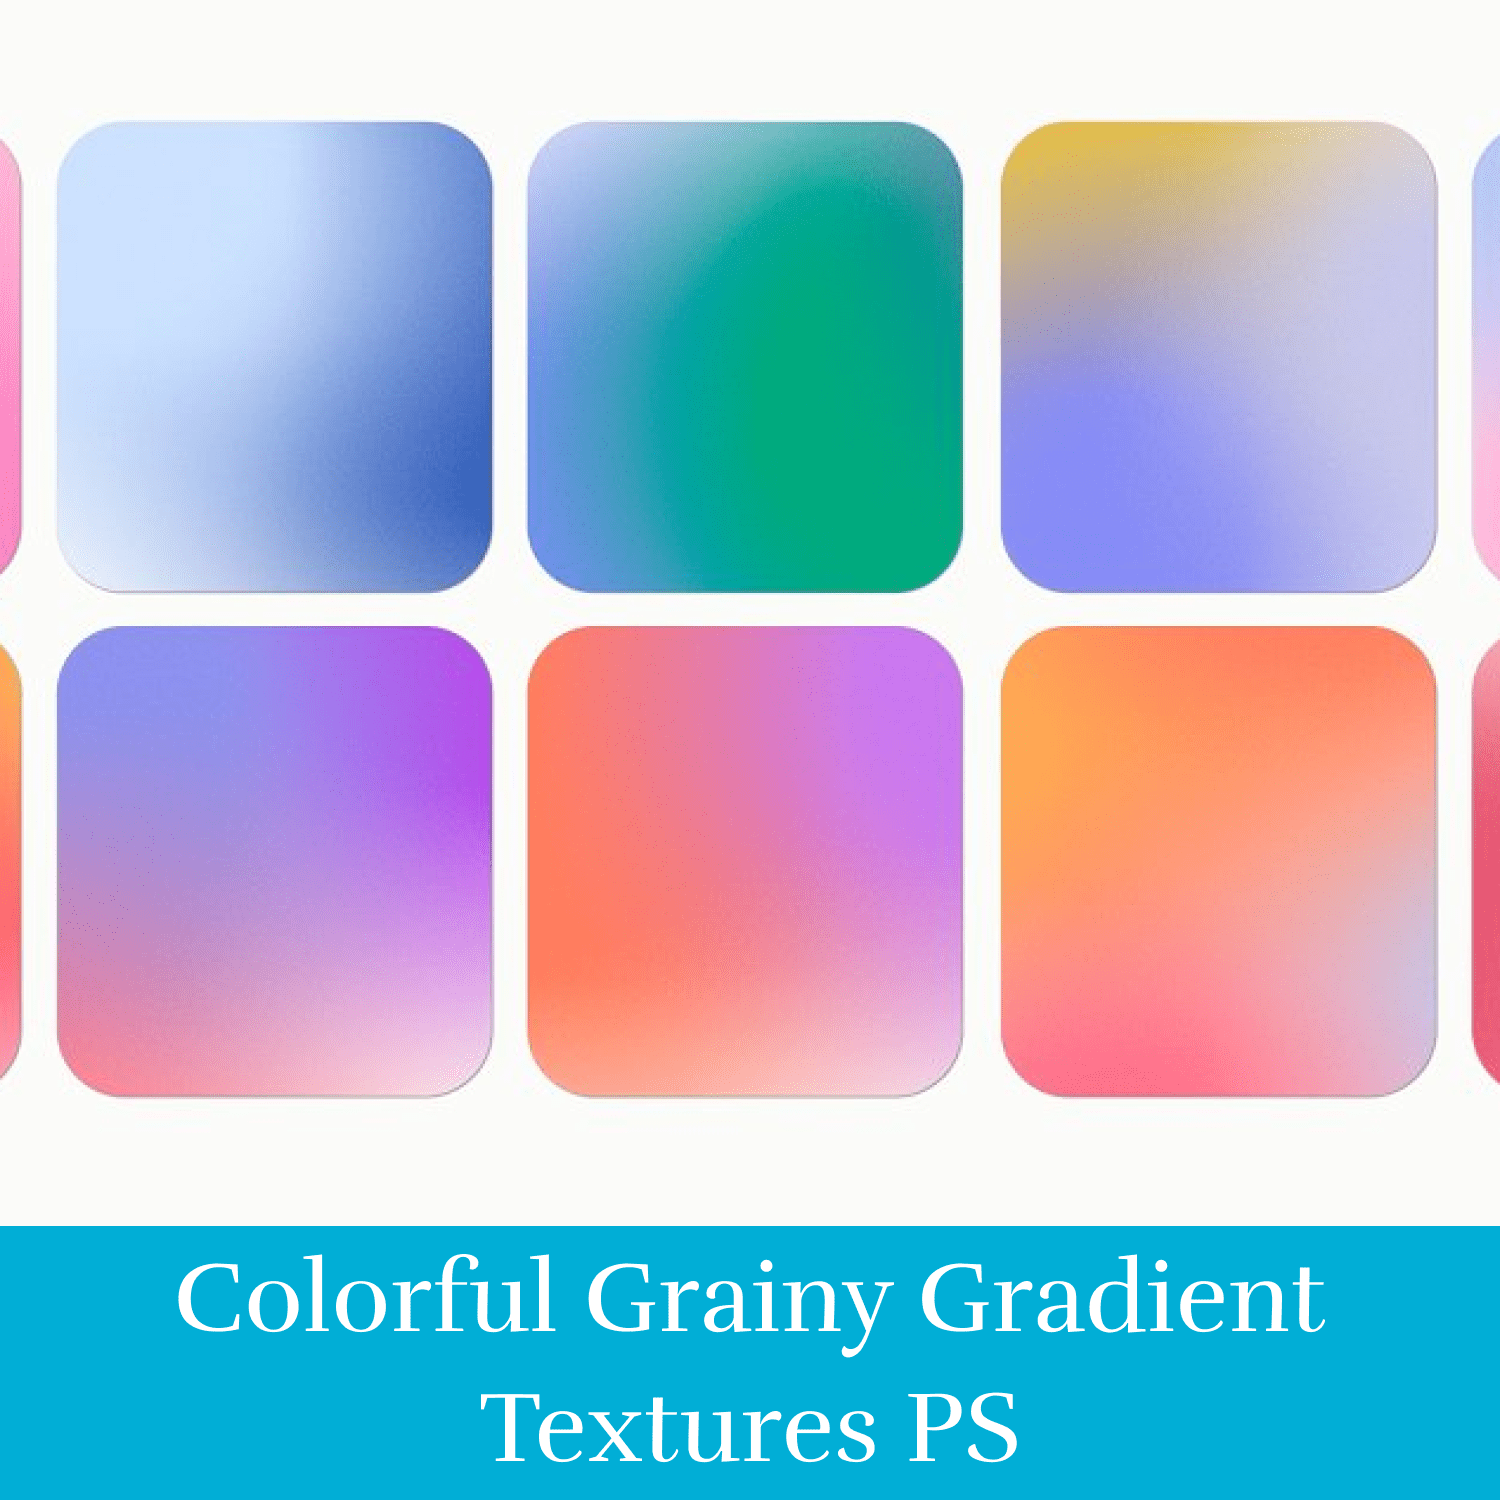 Colorful Grainy Gradient Textures PS cover.